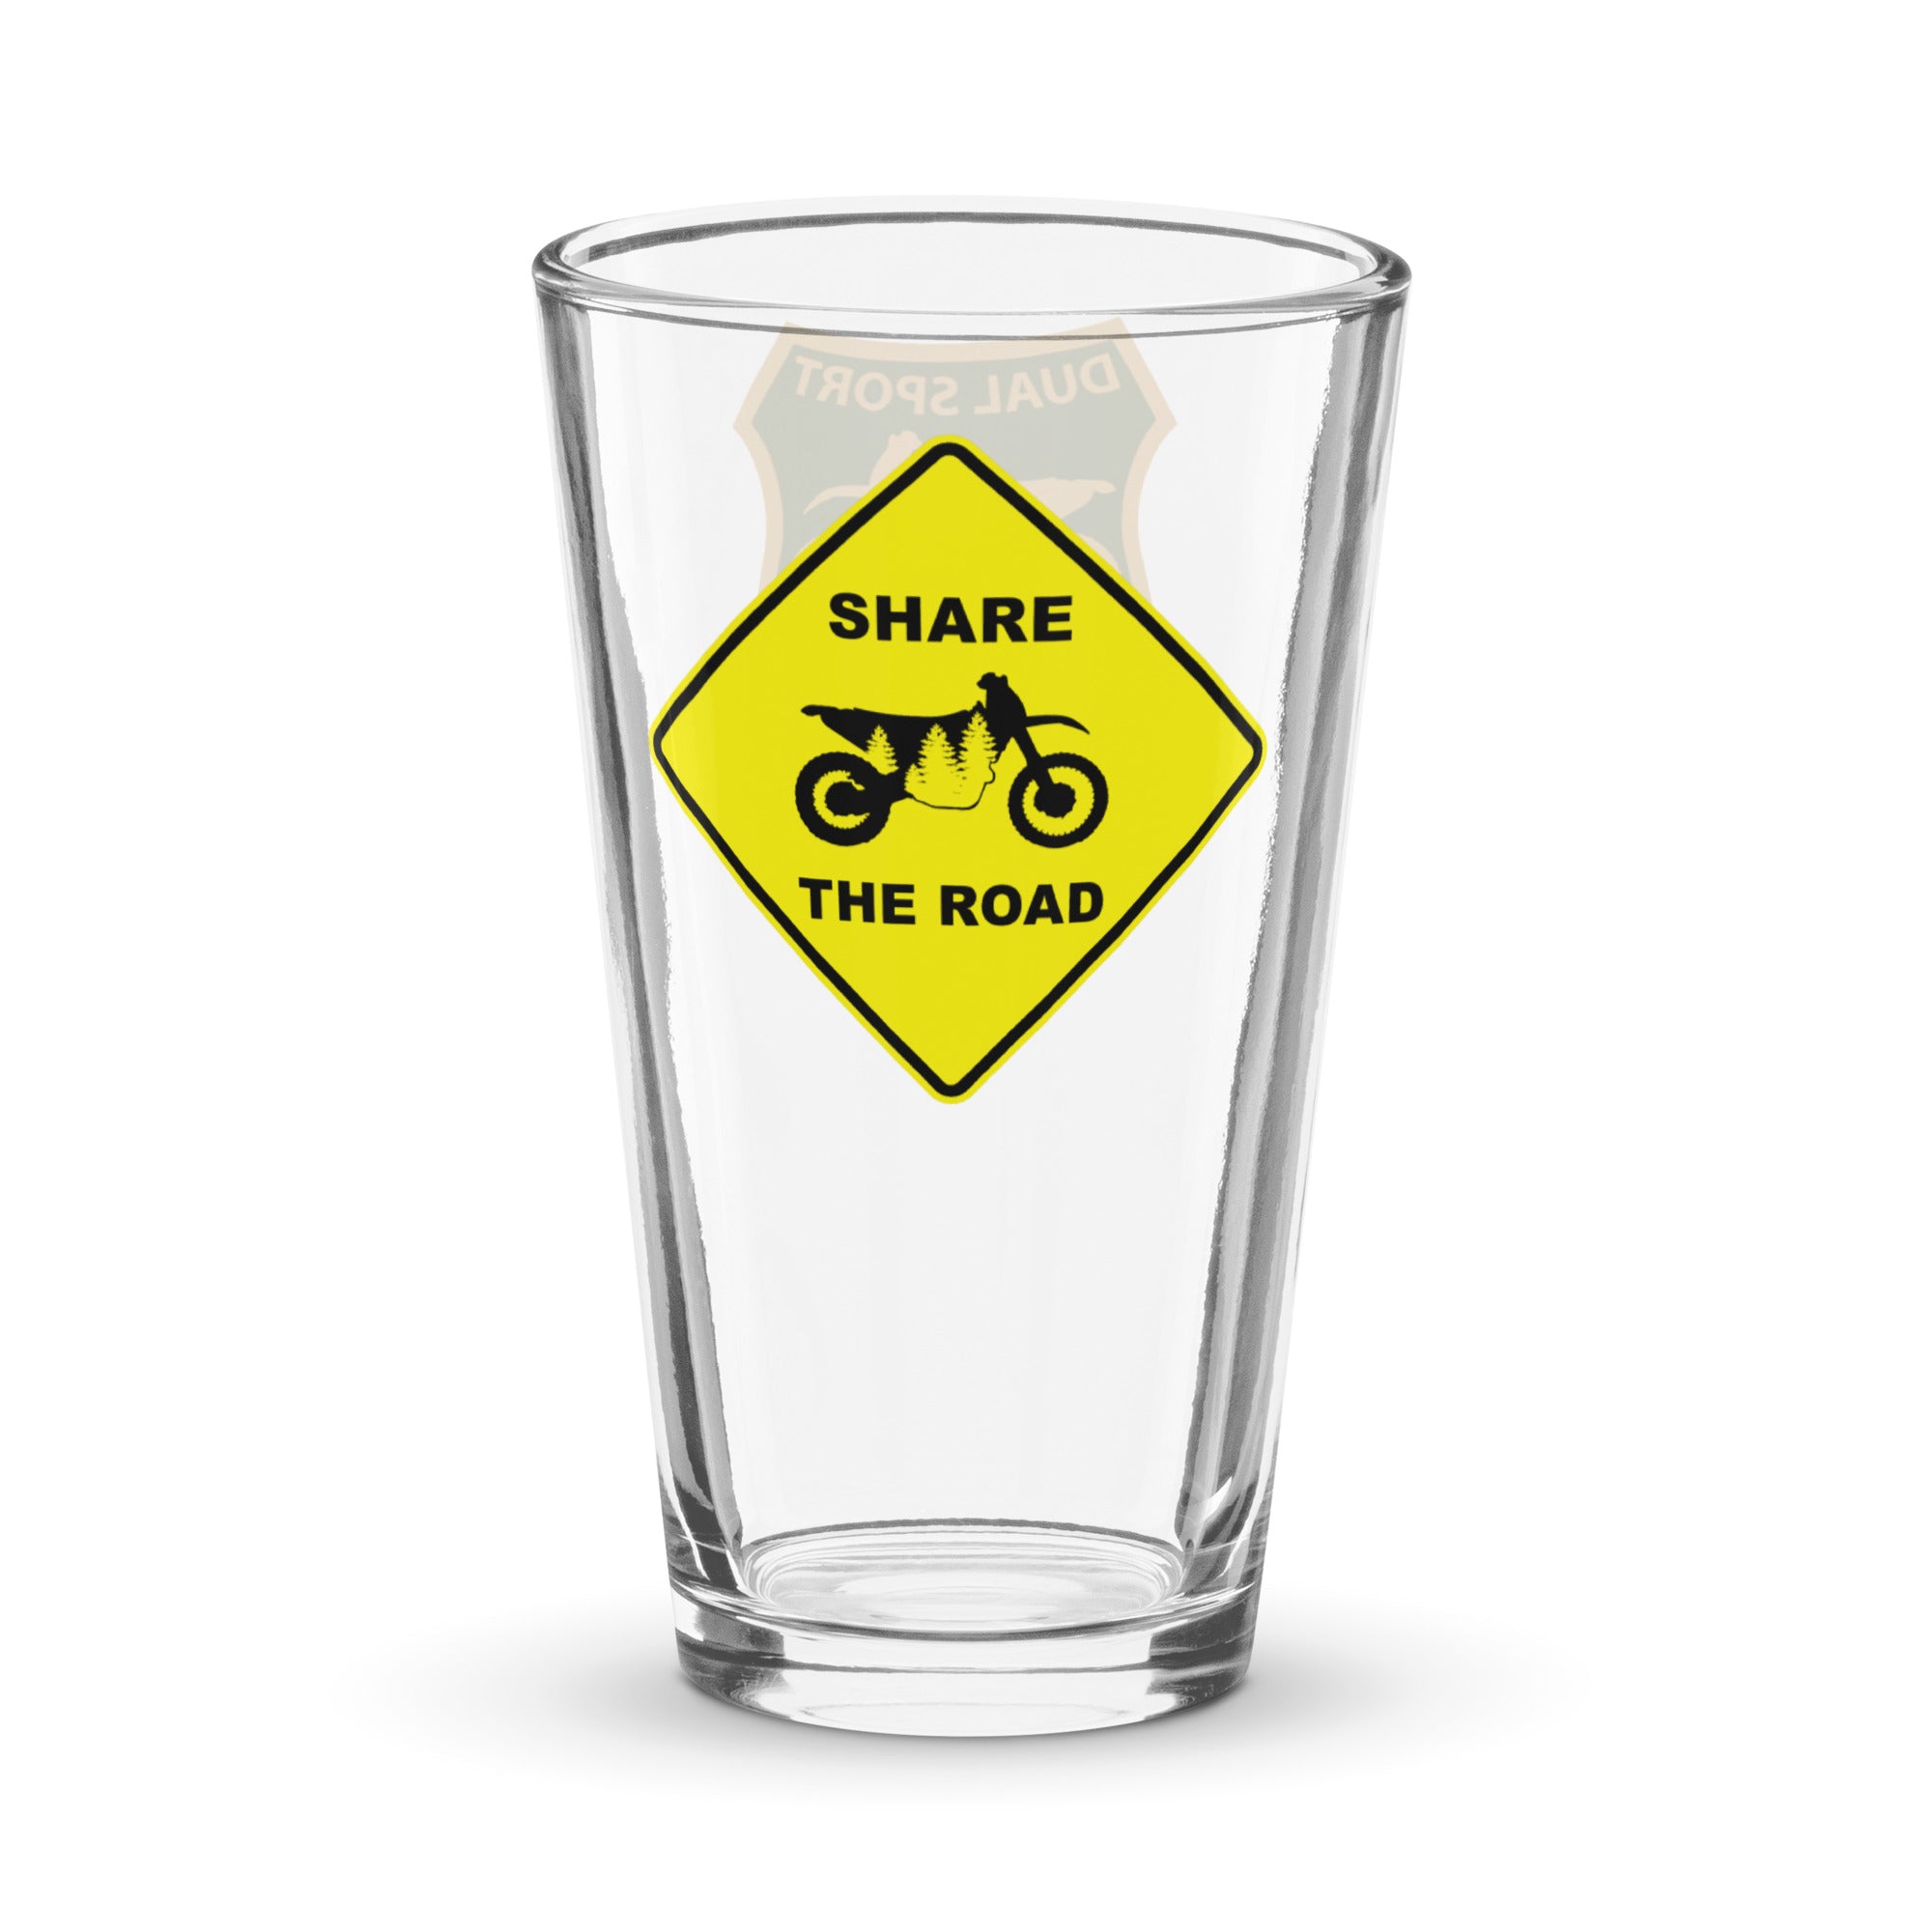 Share The Road Glass, Pint